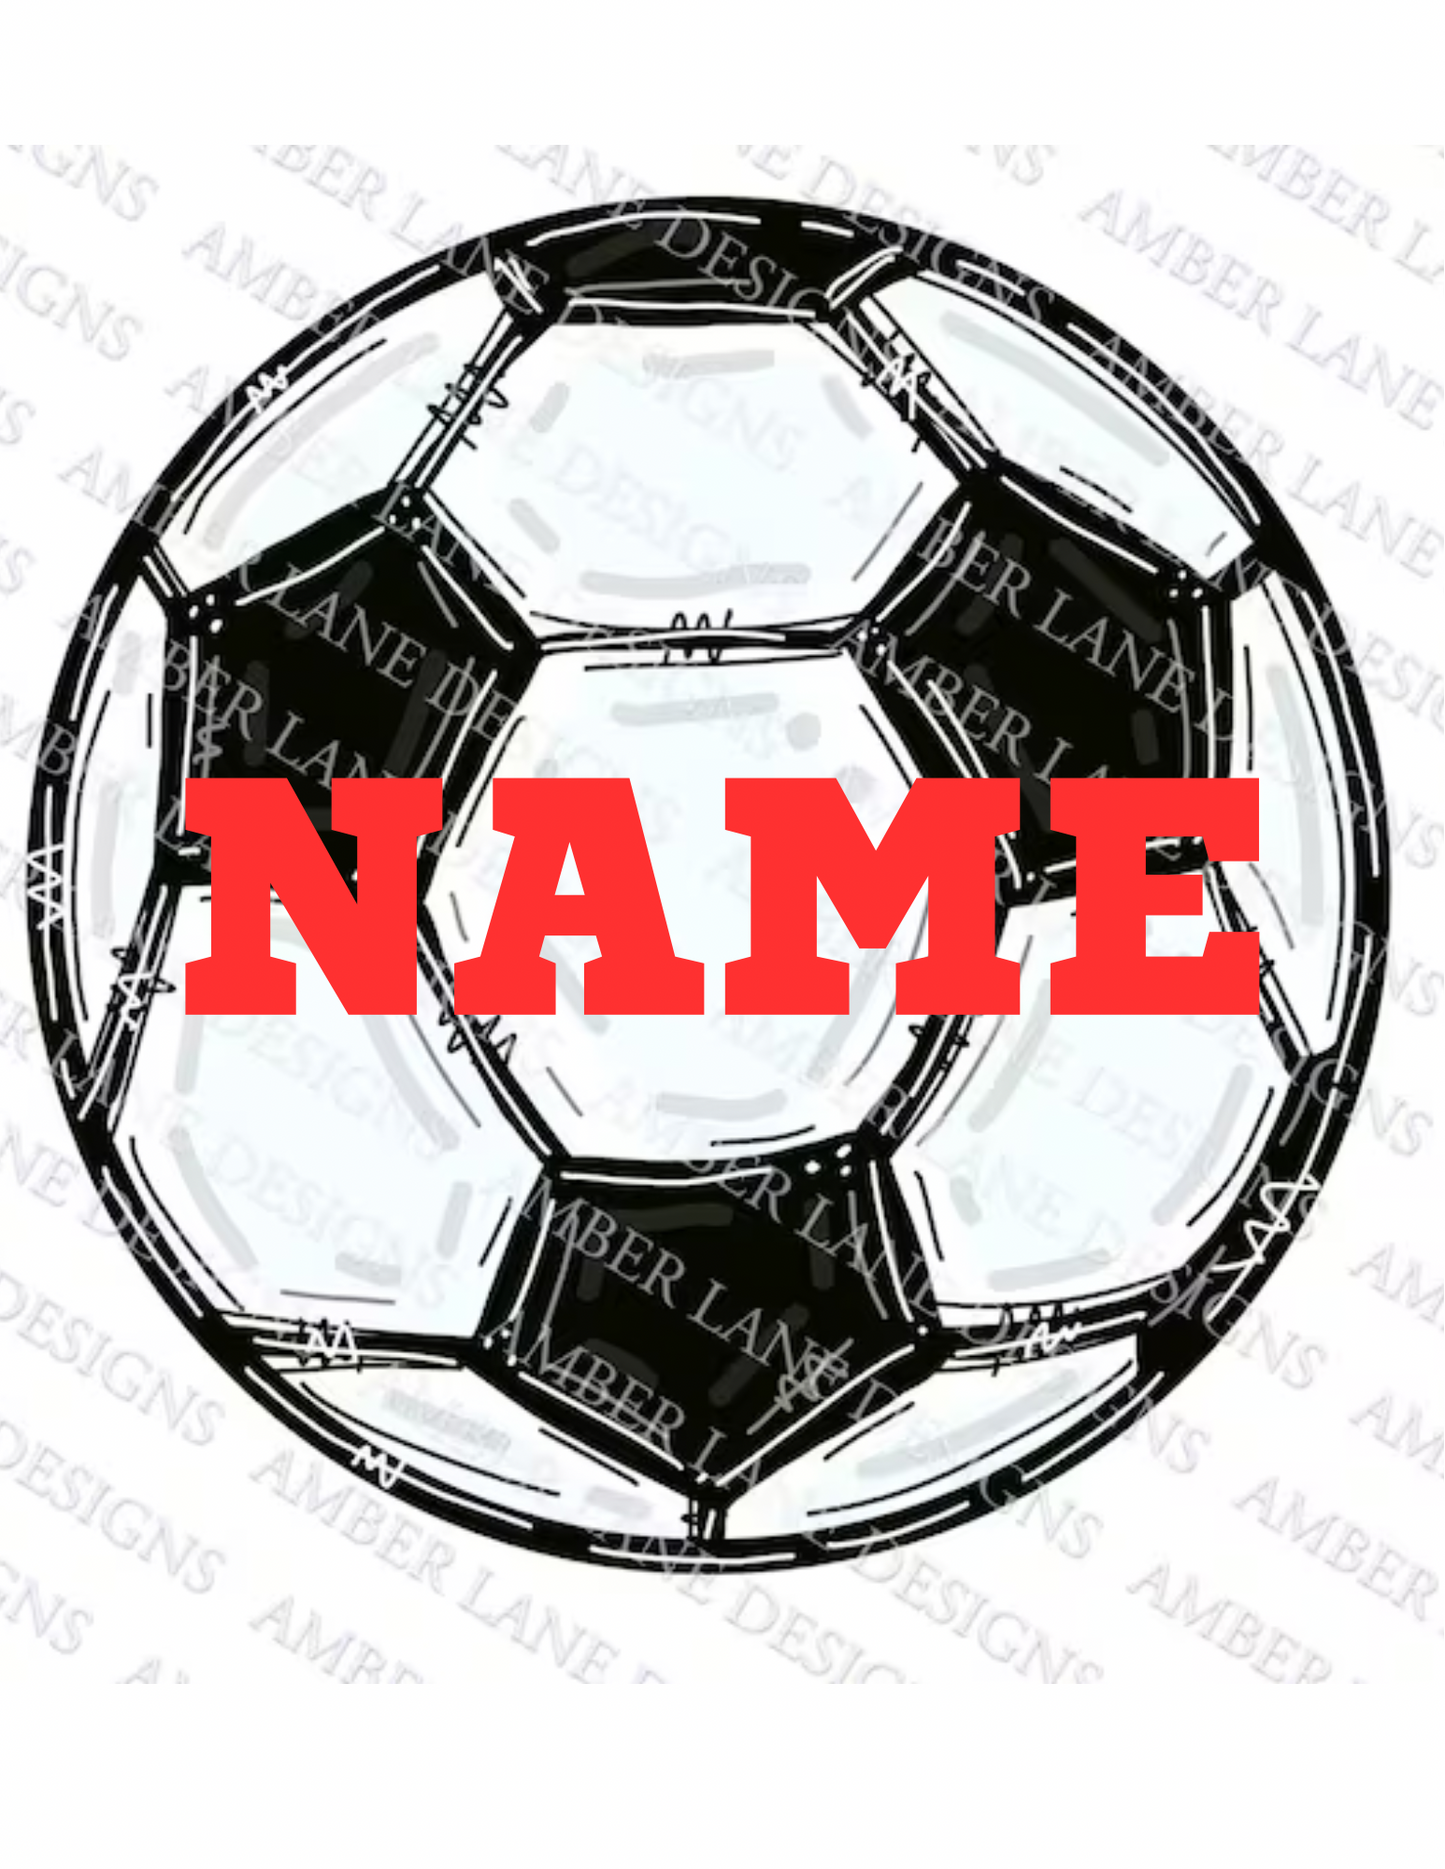 Soccer shirt will personalized name